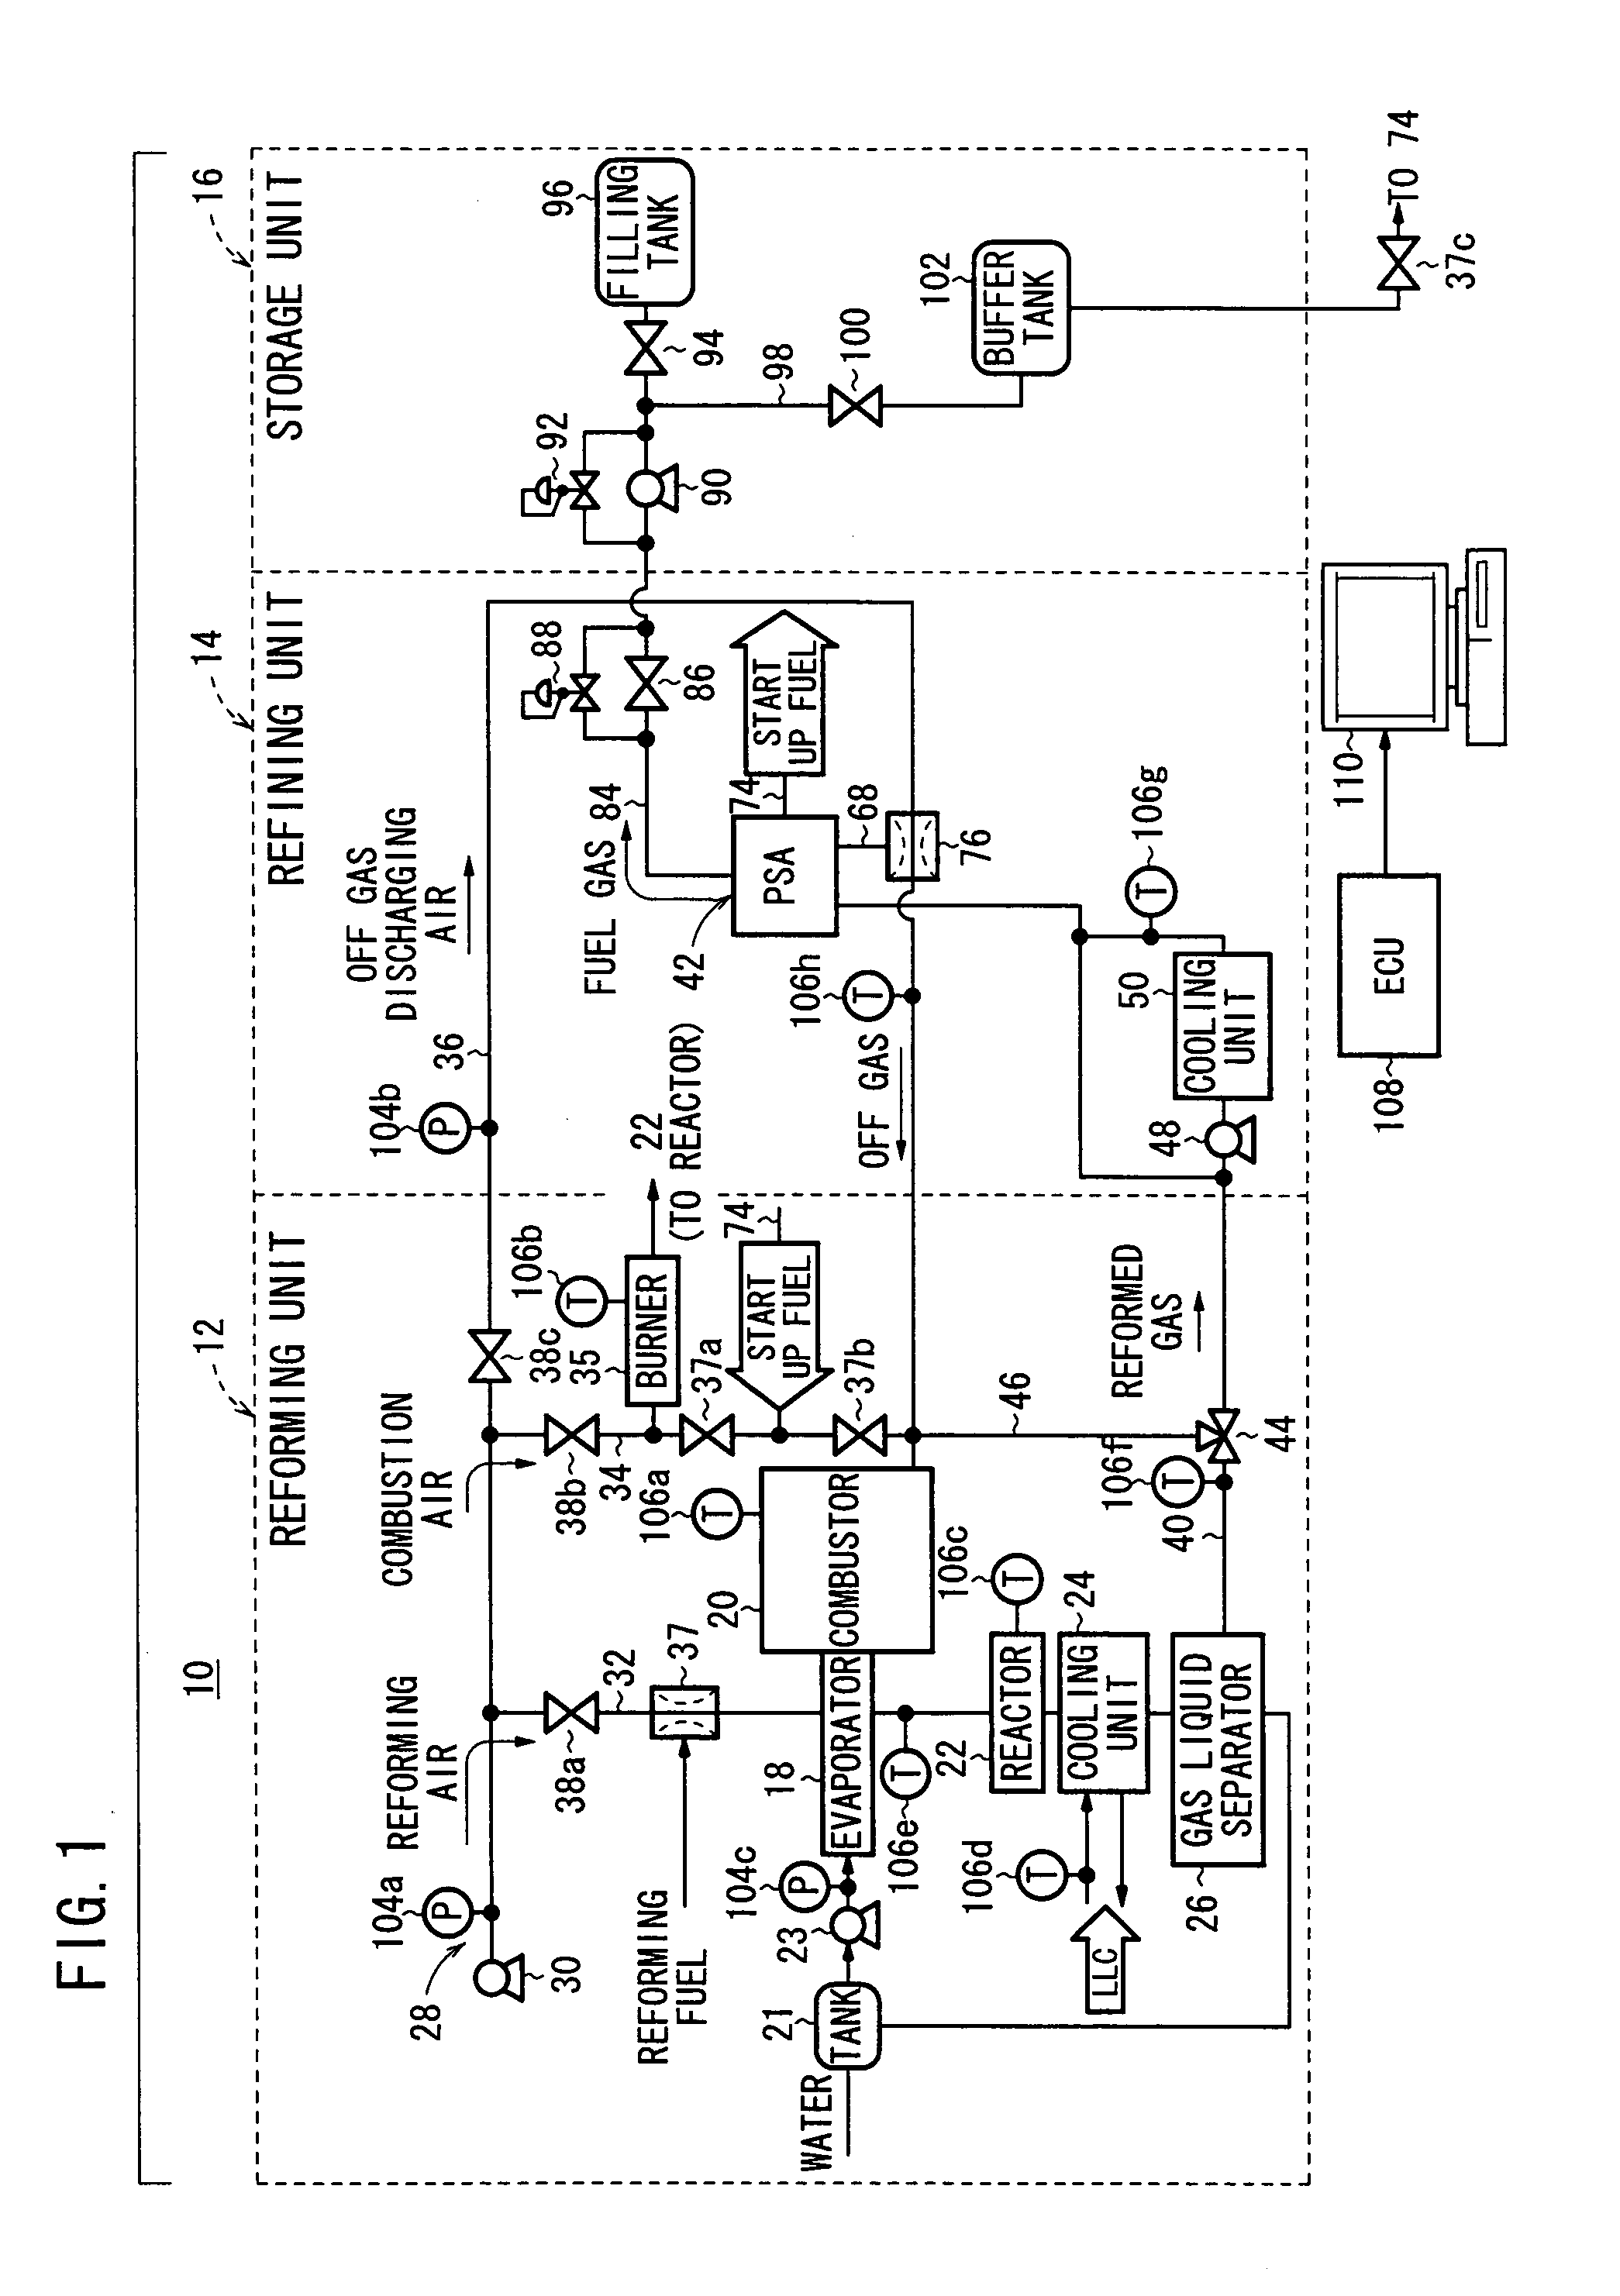 Method of controlling operation of fuel gas production apparatus